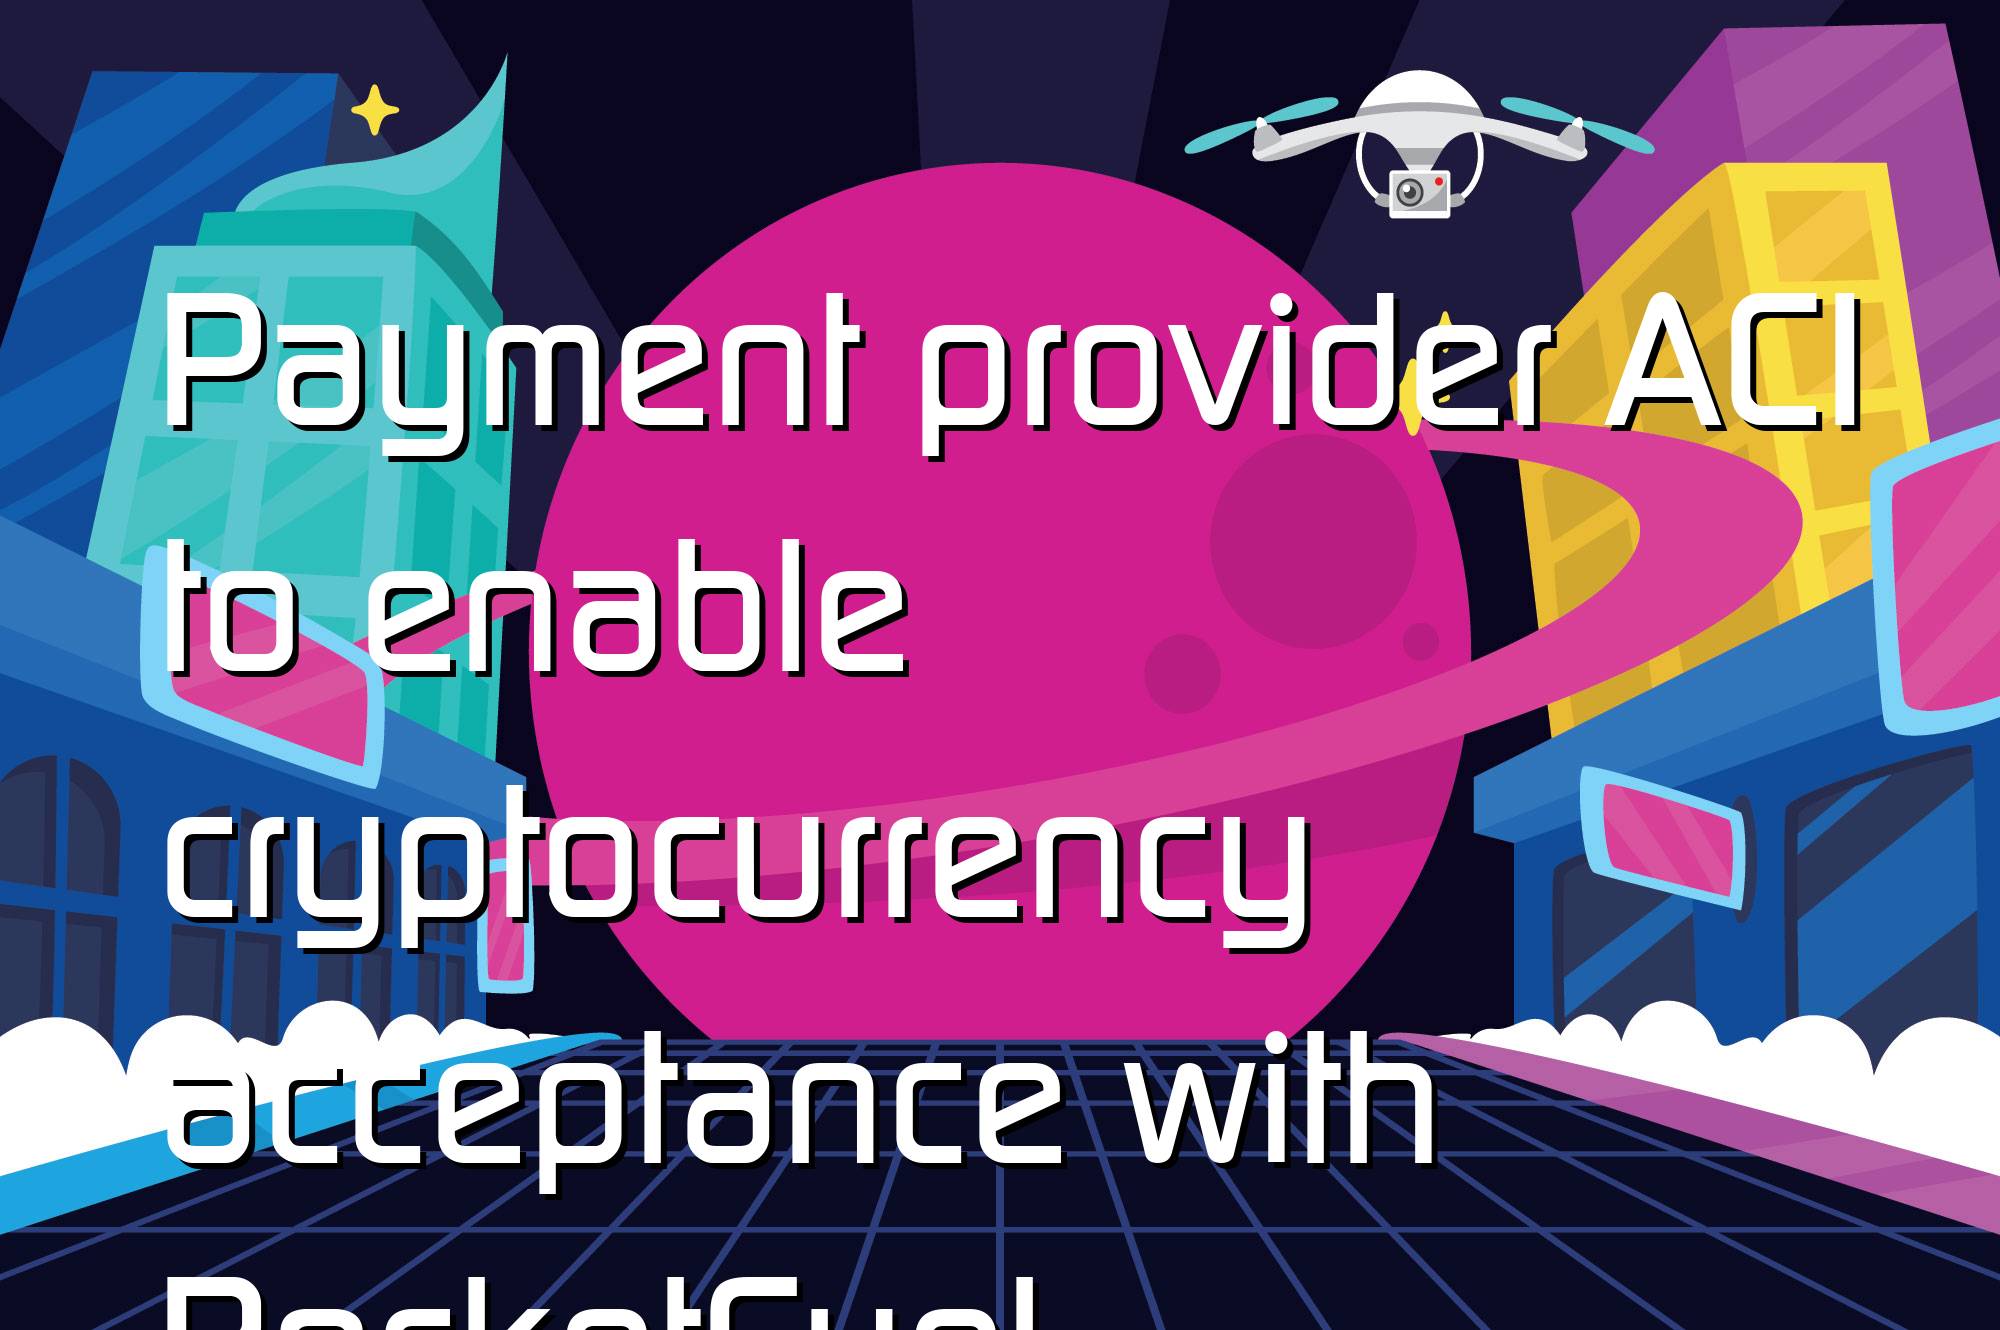 @$60680: Payment provider ACI to enable cryptocurrency acceptance with RocketFuel